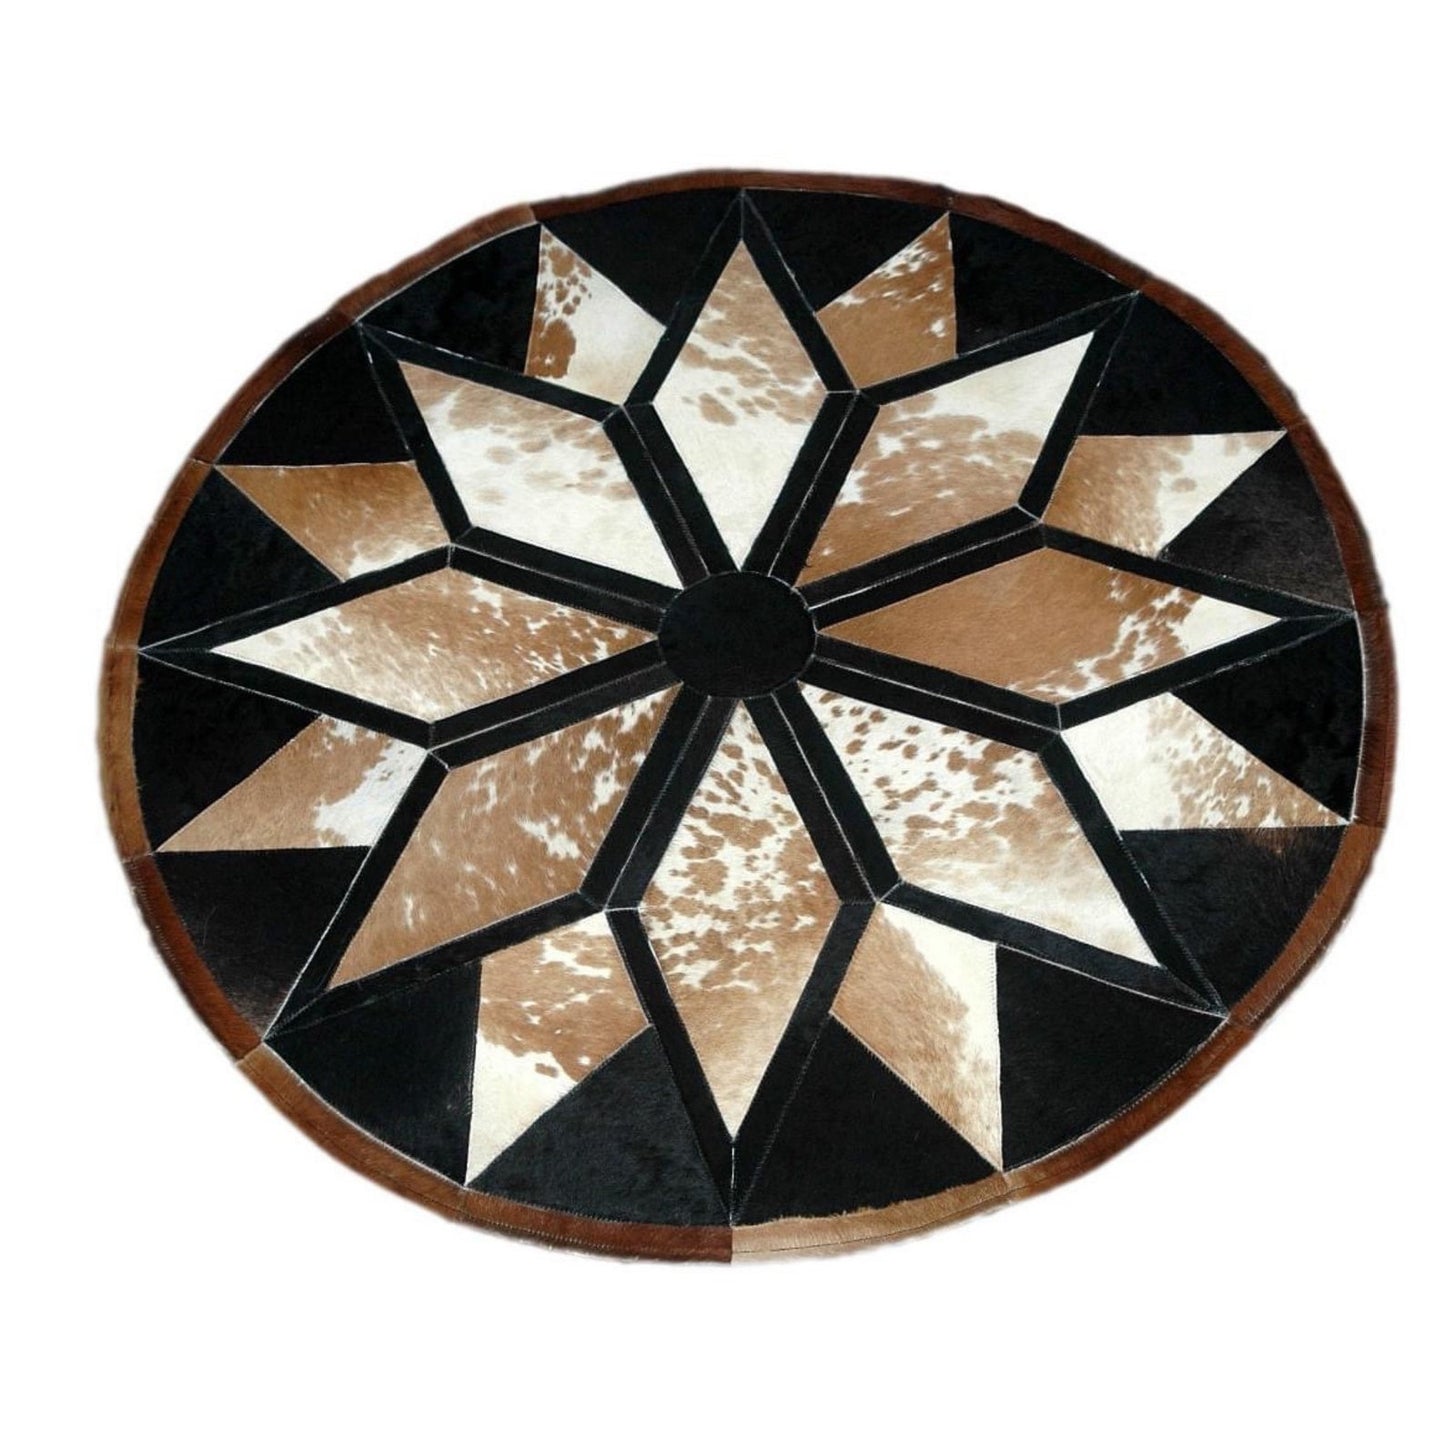 This real cowhide rug patchwork rug is perfect for adding a luxurious, rustic look to any home. 